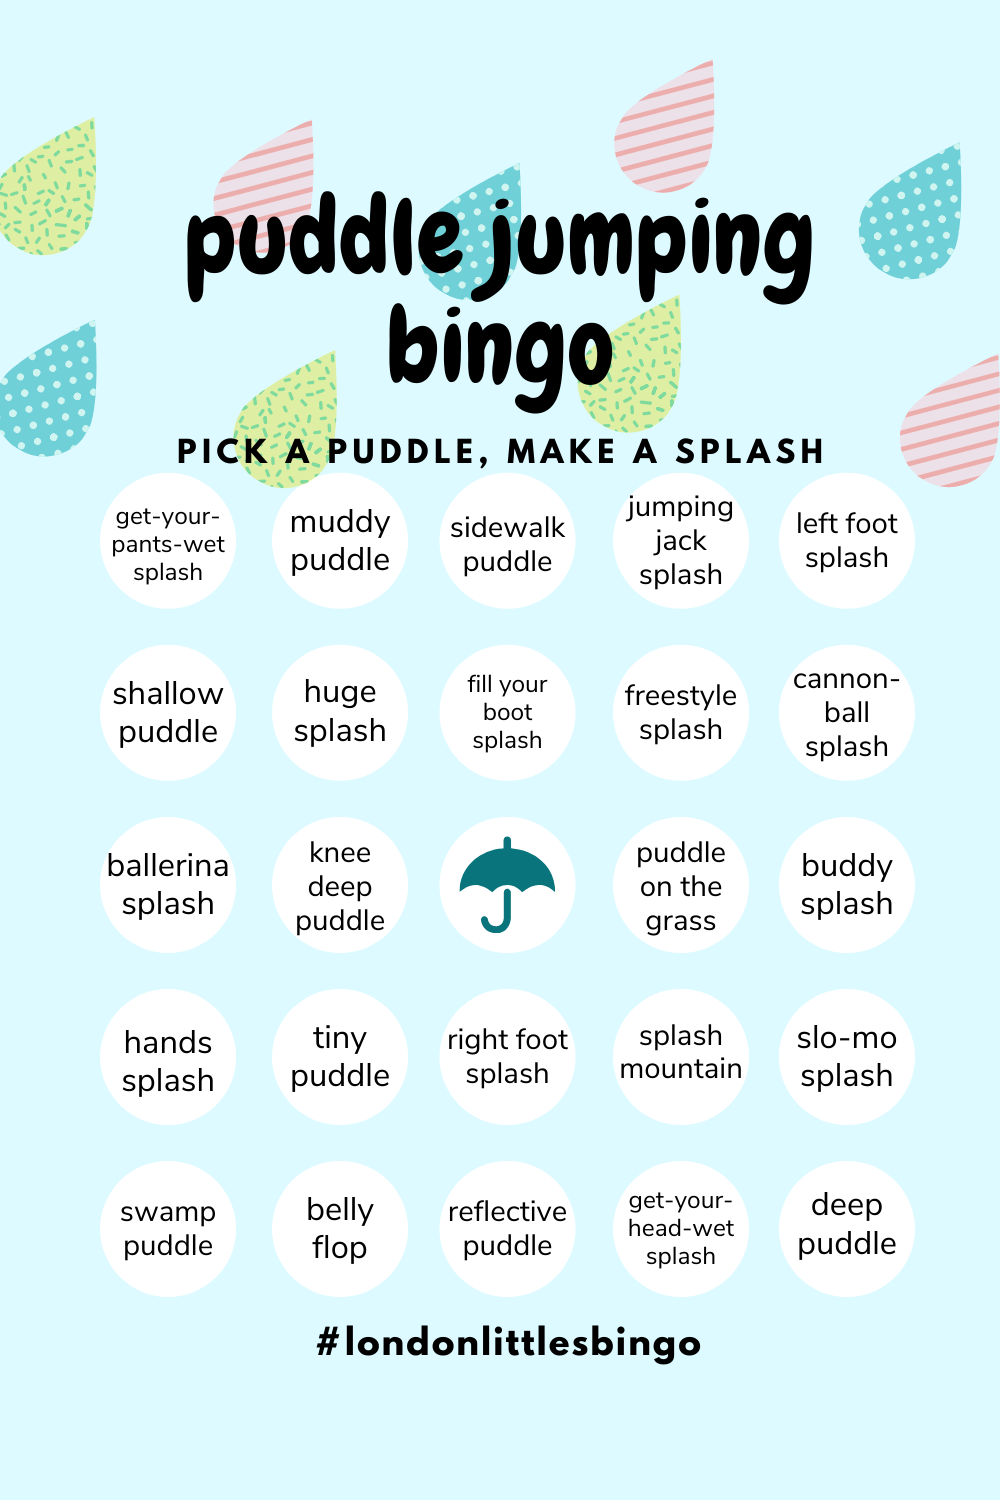 puddle jumping bingo game for kids on rainy days